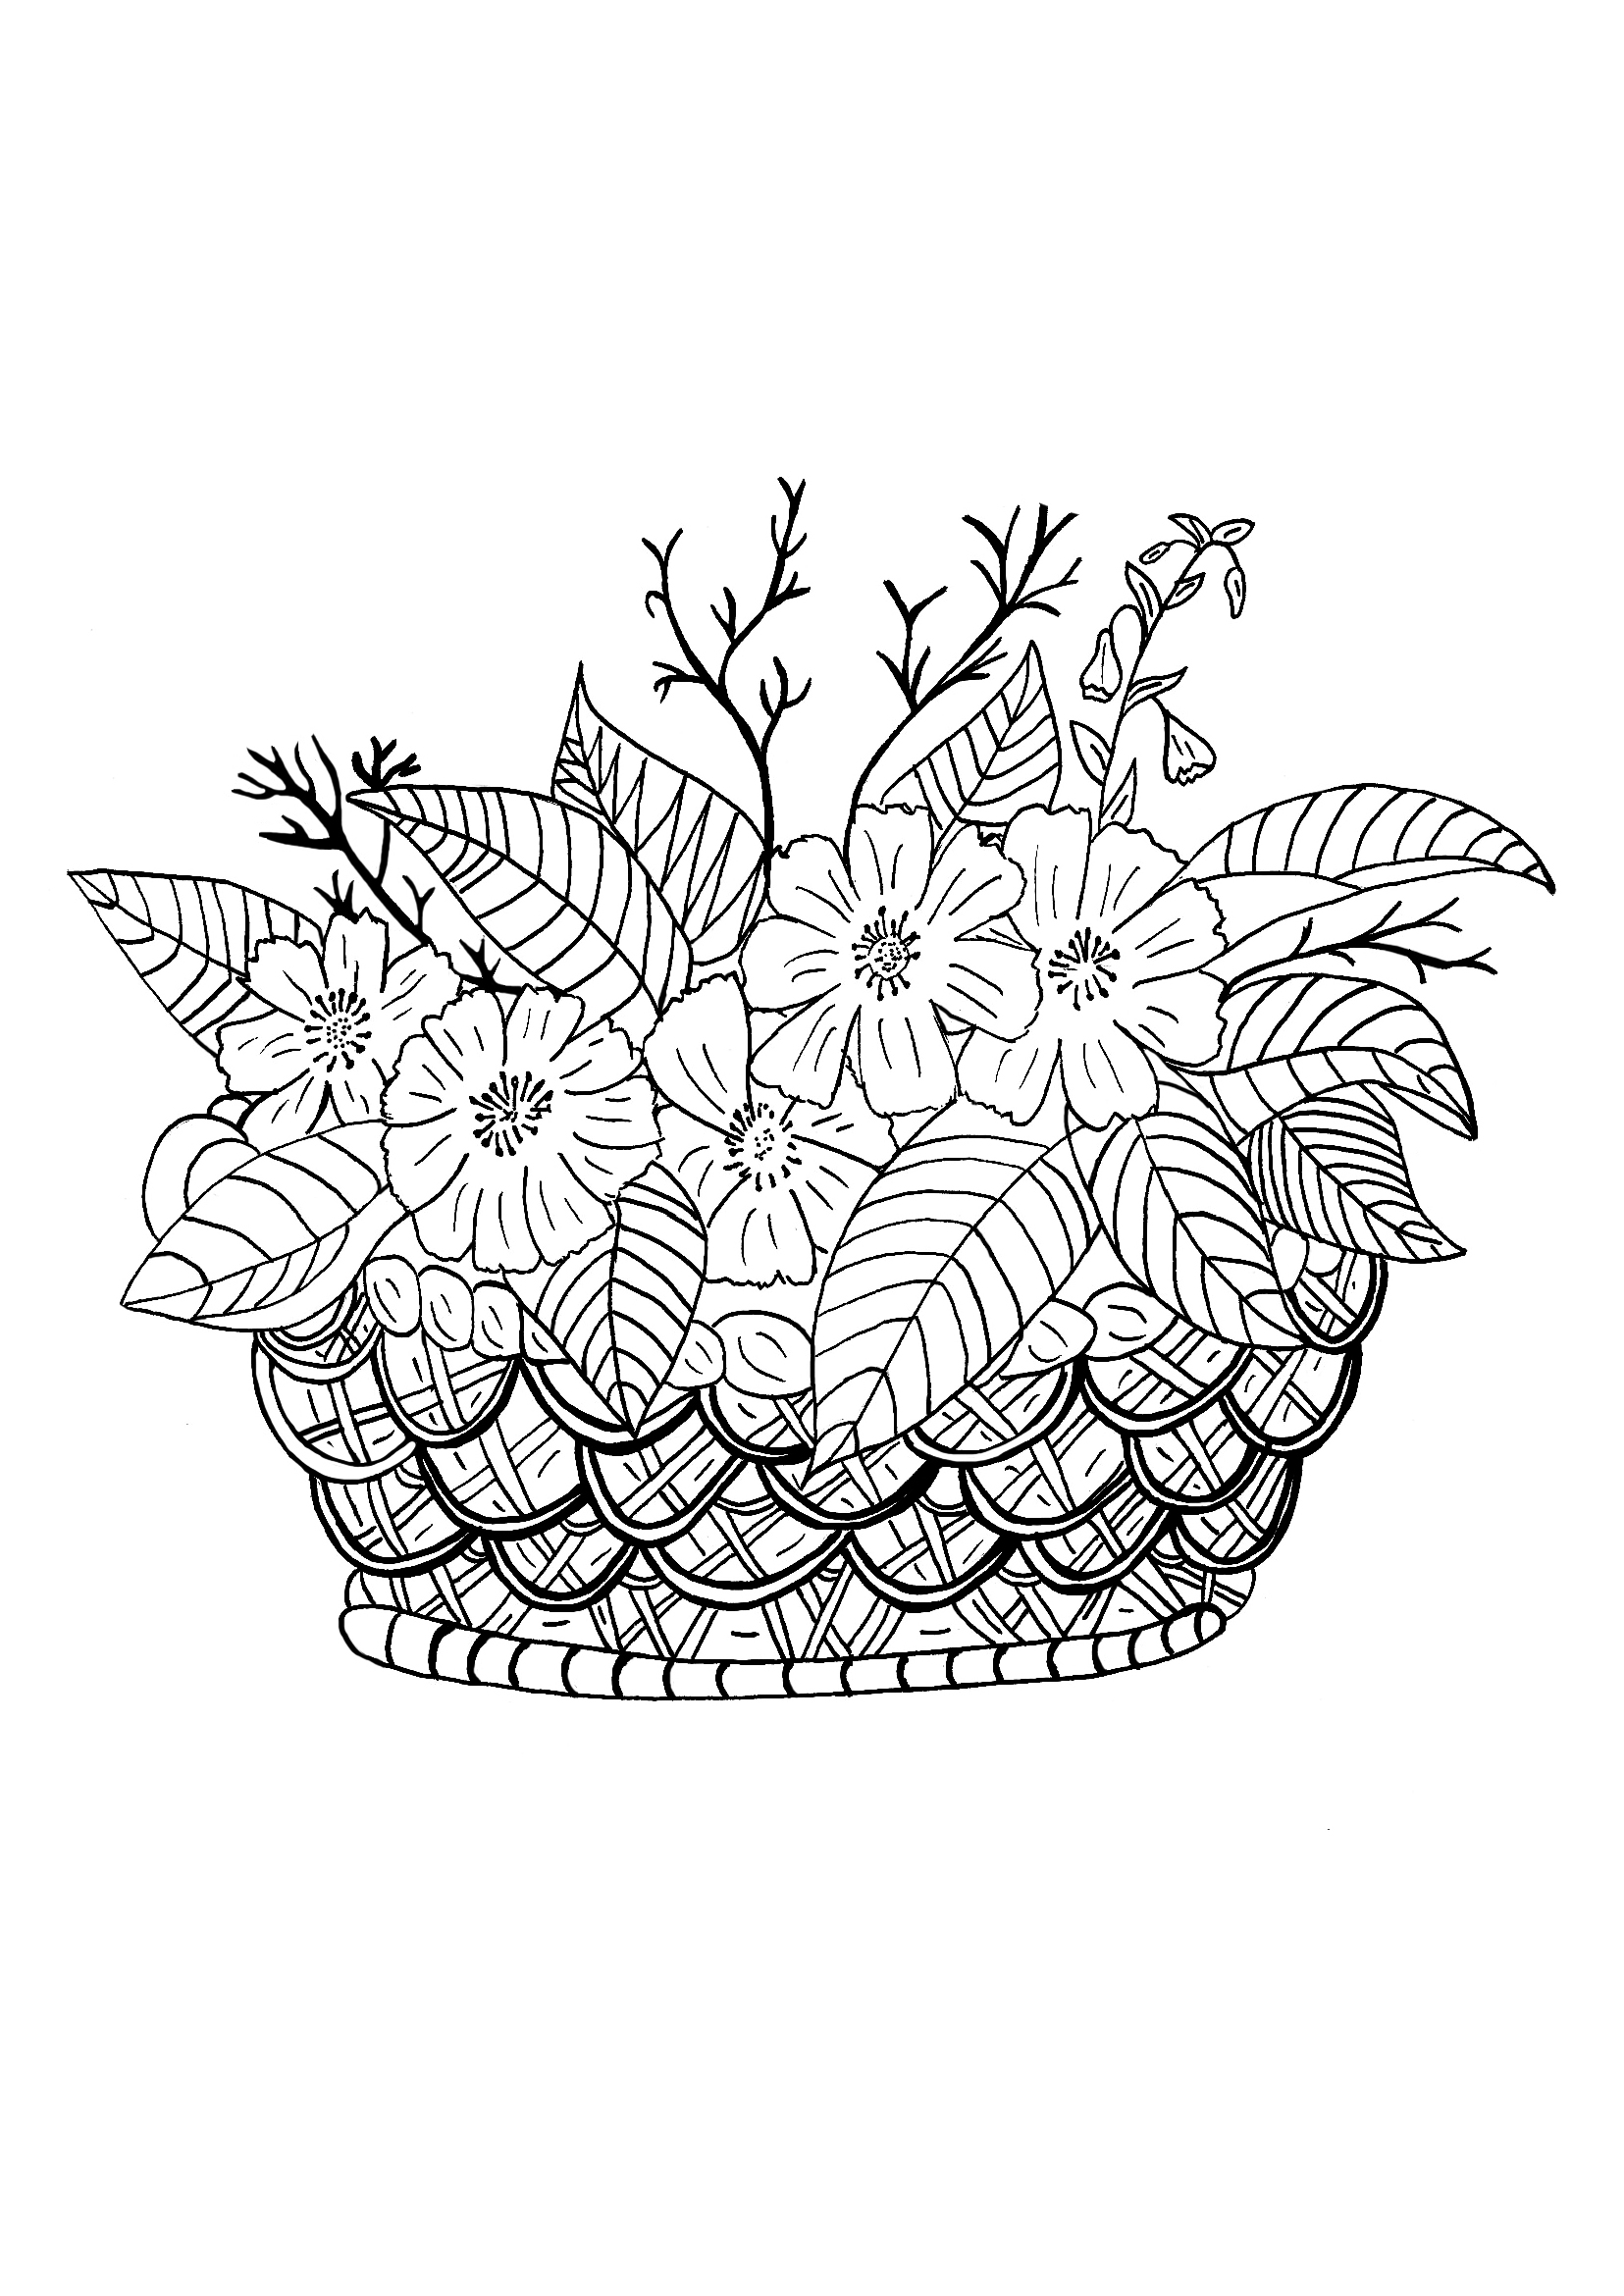 A basket, some flowers and a good moment for a coloring page, Artist : Celine